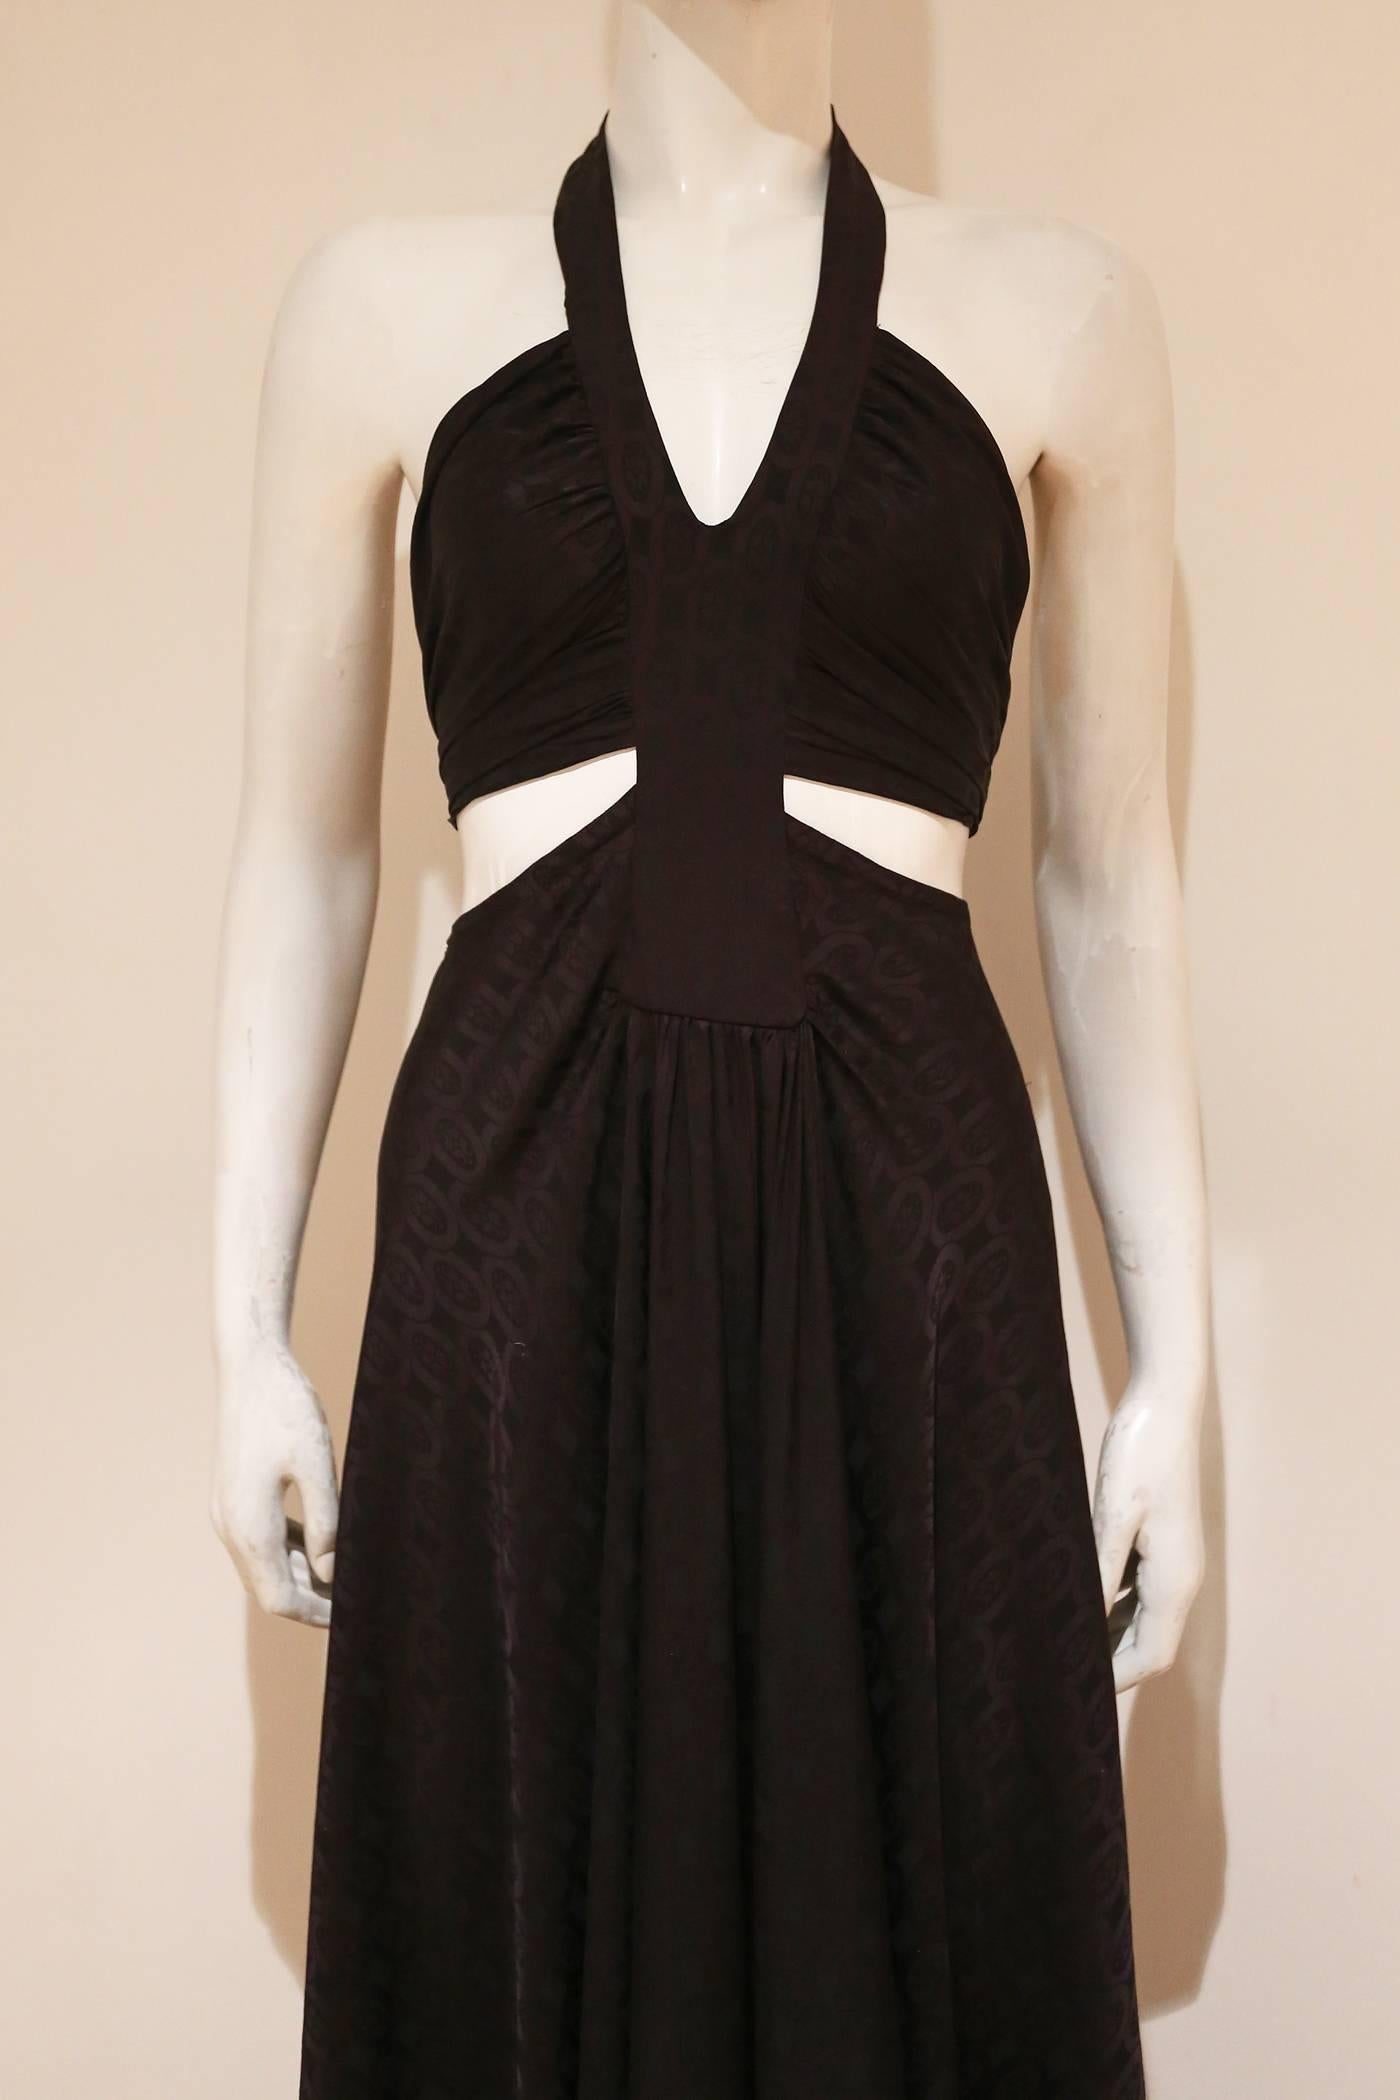 A beautiful and rare AnnaCat black halter-neck evening dress from the 1960s. The dress features a pleated skirt, low back and a bikini attached to the yoke with ties at the rear. 

Approx. UK 10-12  European 38-40

Annacat was the Biba of The